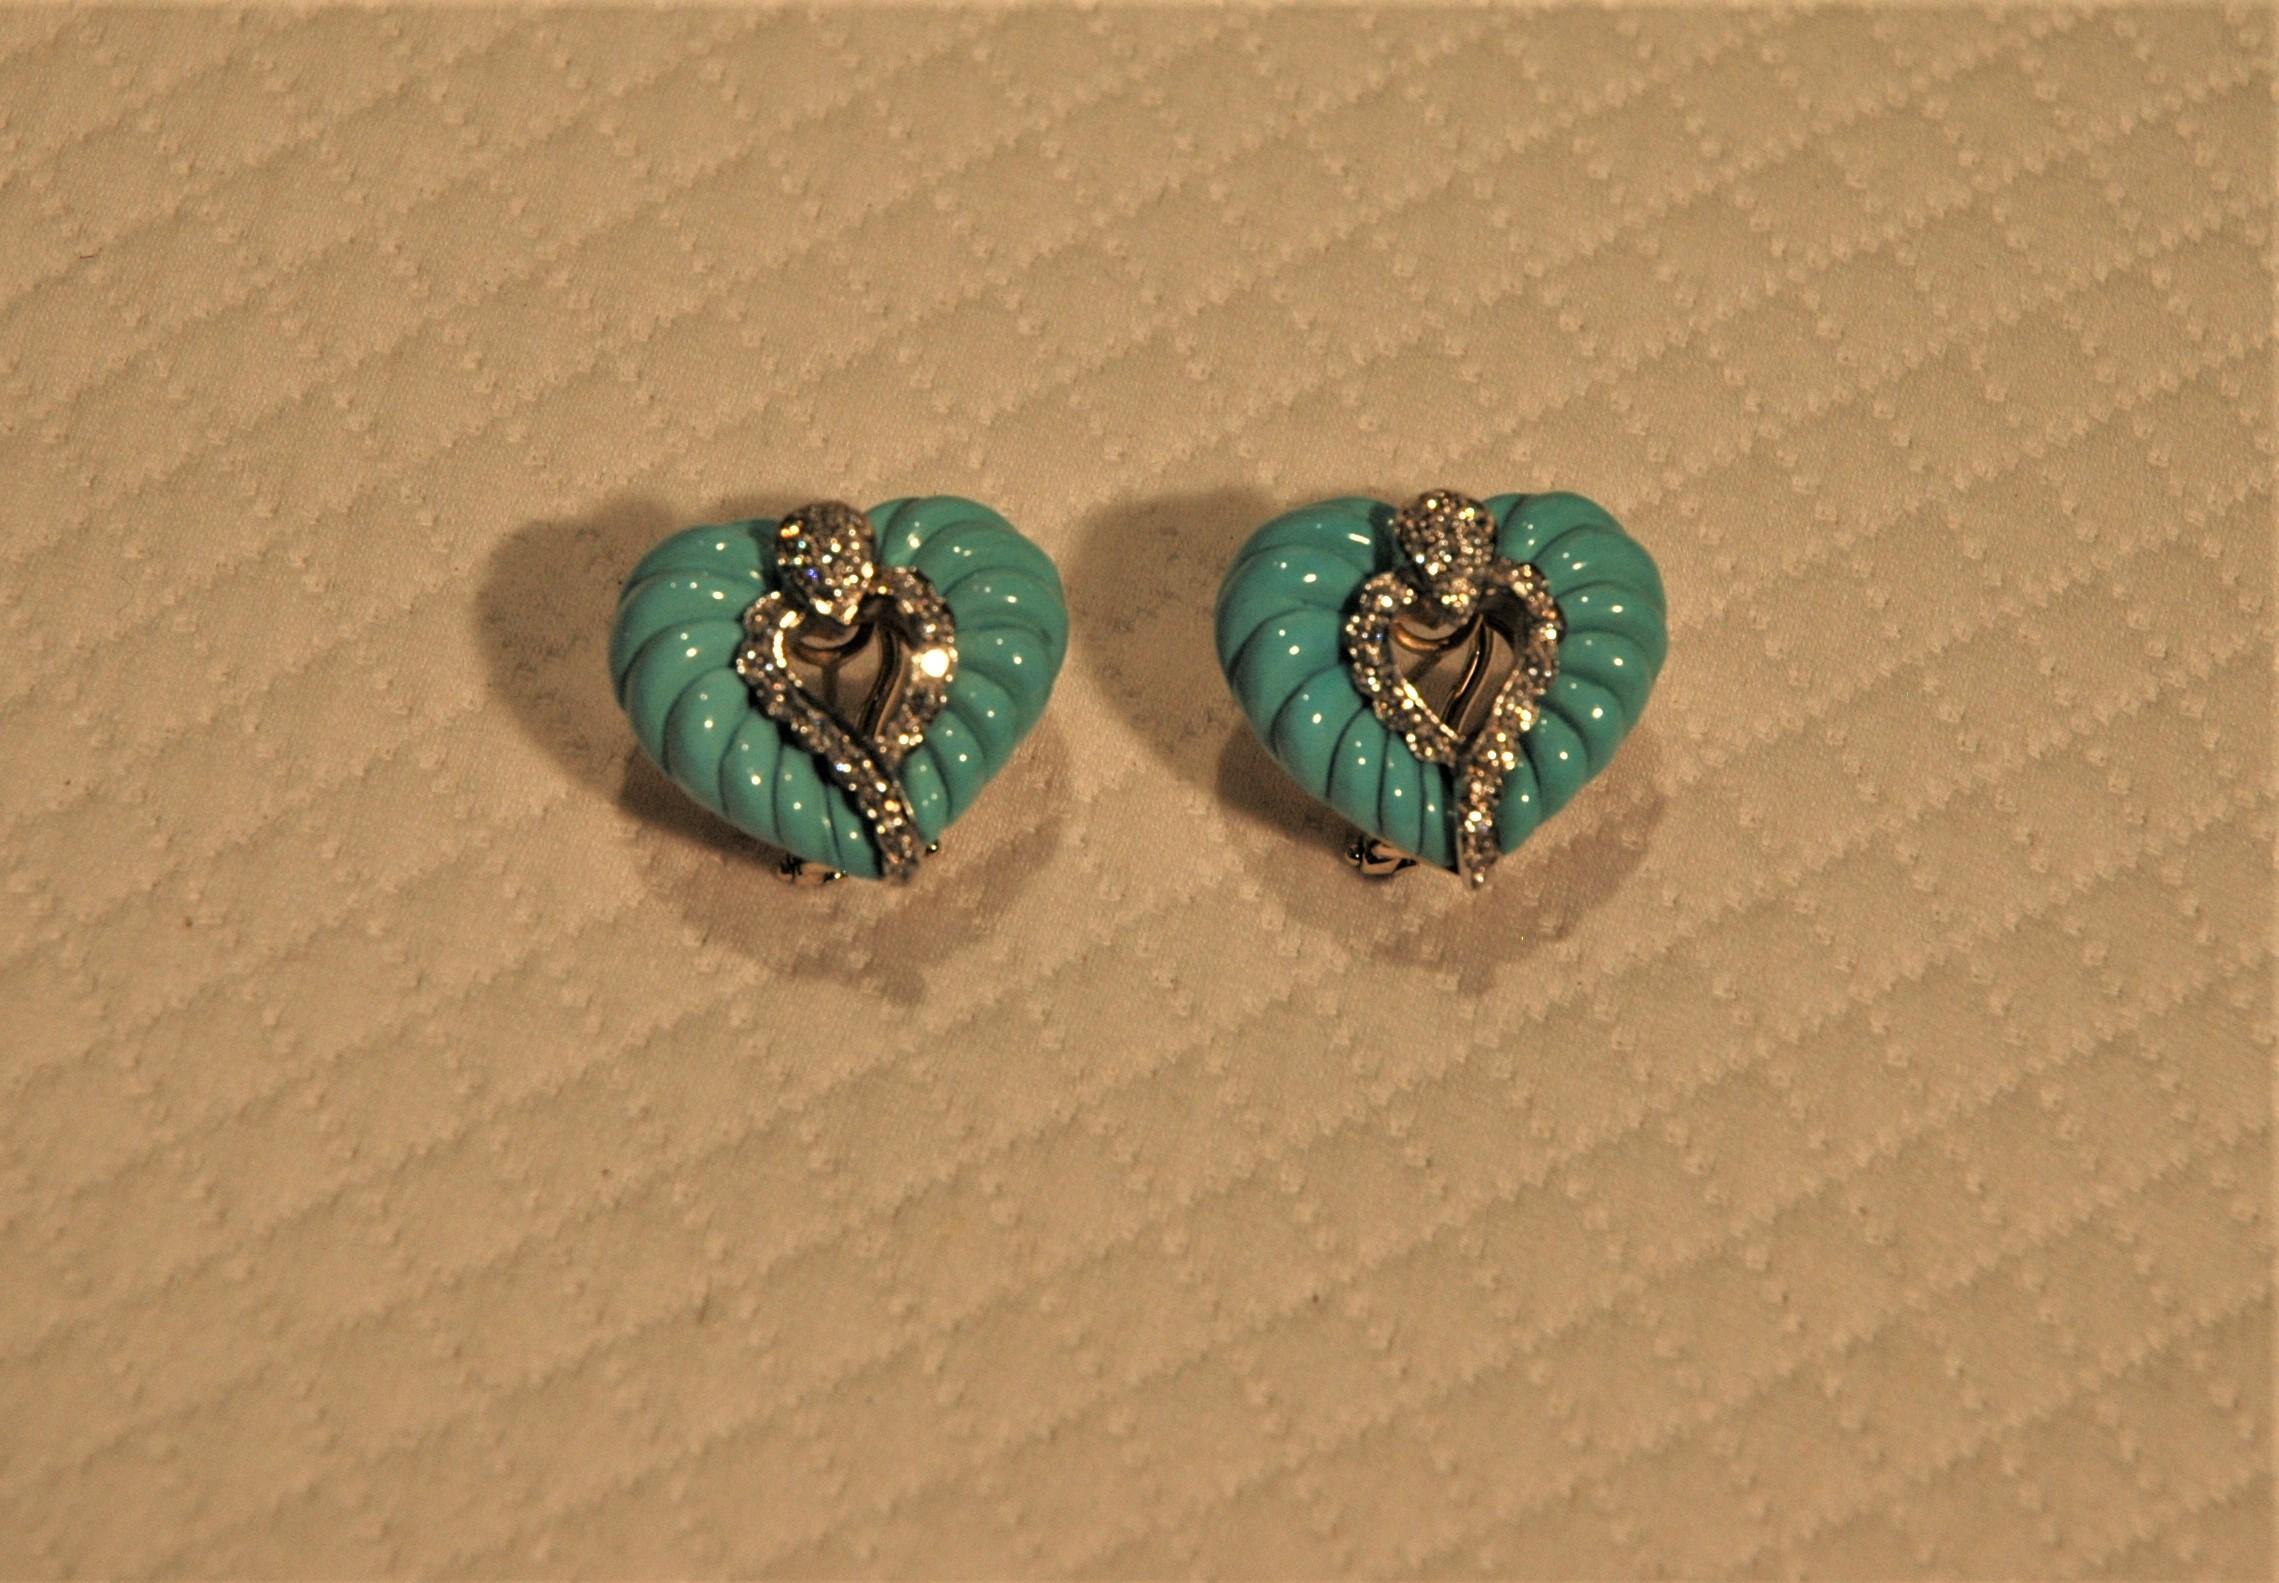 Heart-shaped lobe earrings in 18 kt yellow gold, natural turquoises, diamonds 0.48 carats. The turquoise part is hand-engraved creating the two lobes of the heart. Unique piece made in Italy.